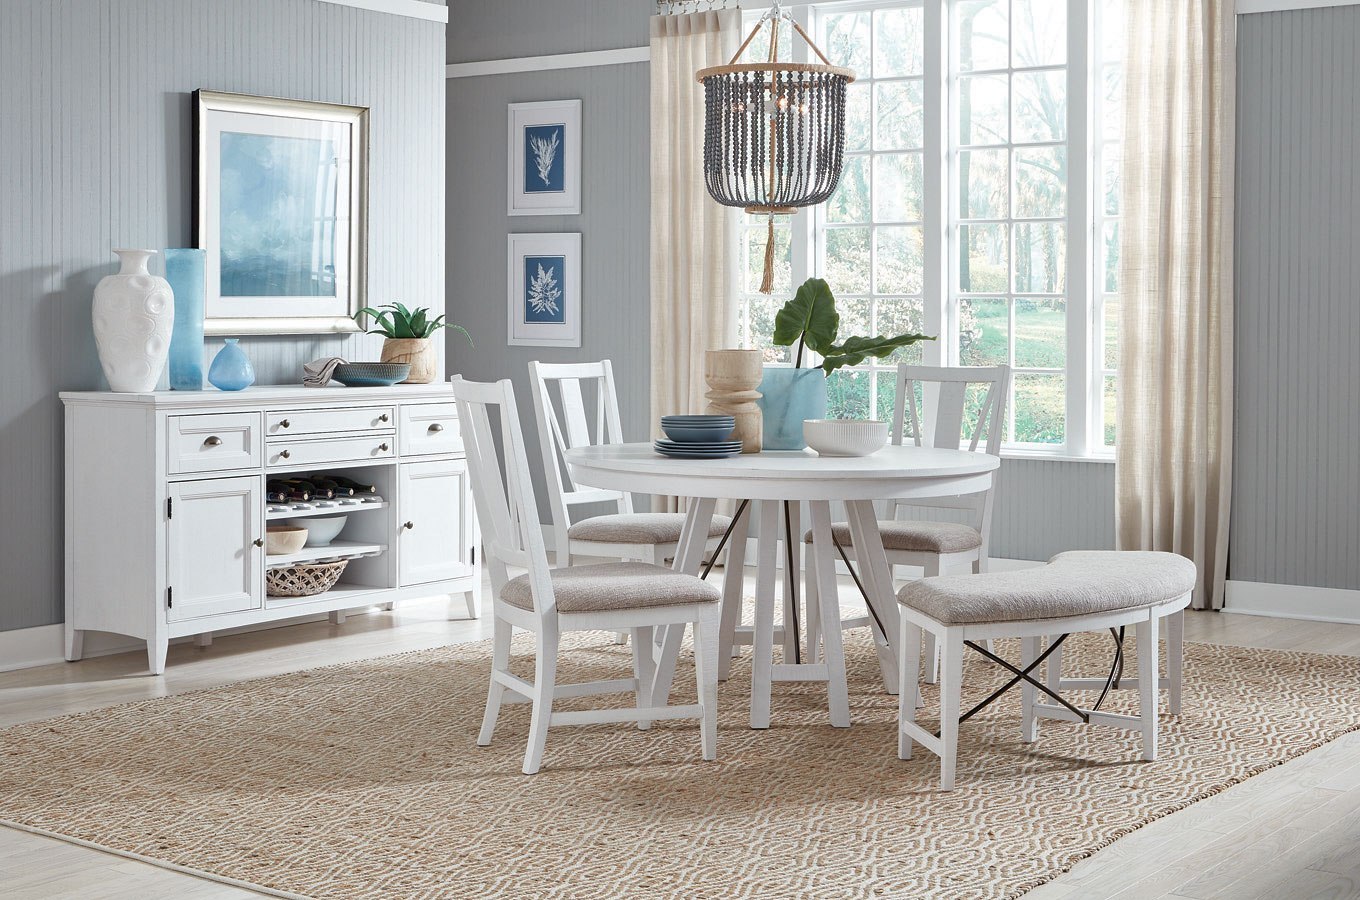 Heron Cove Round Dining Room Set w/ Chairs and Curved Bench